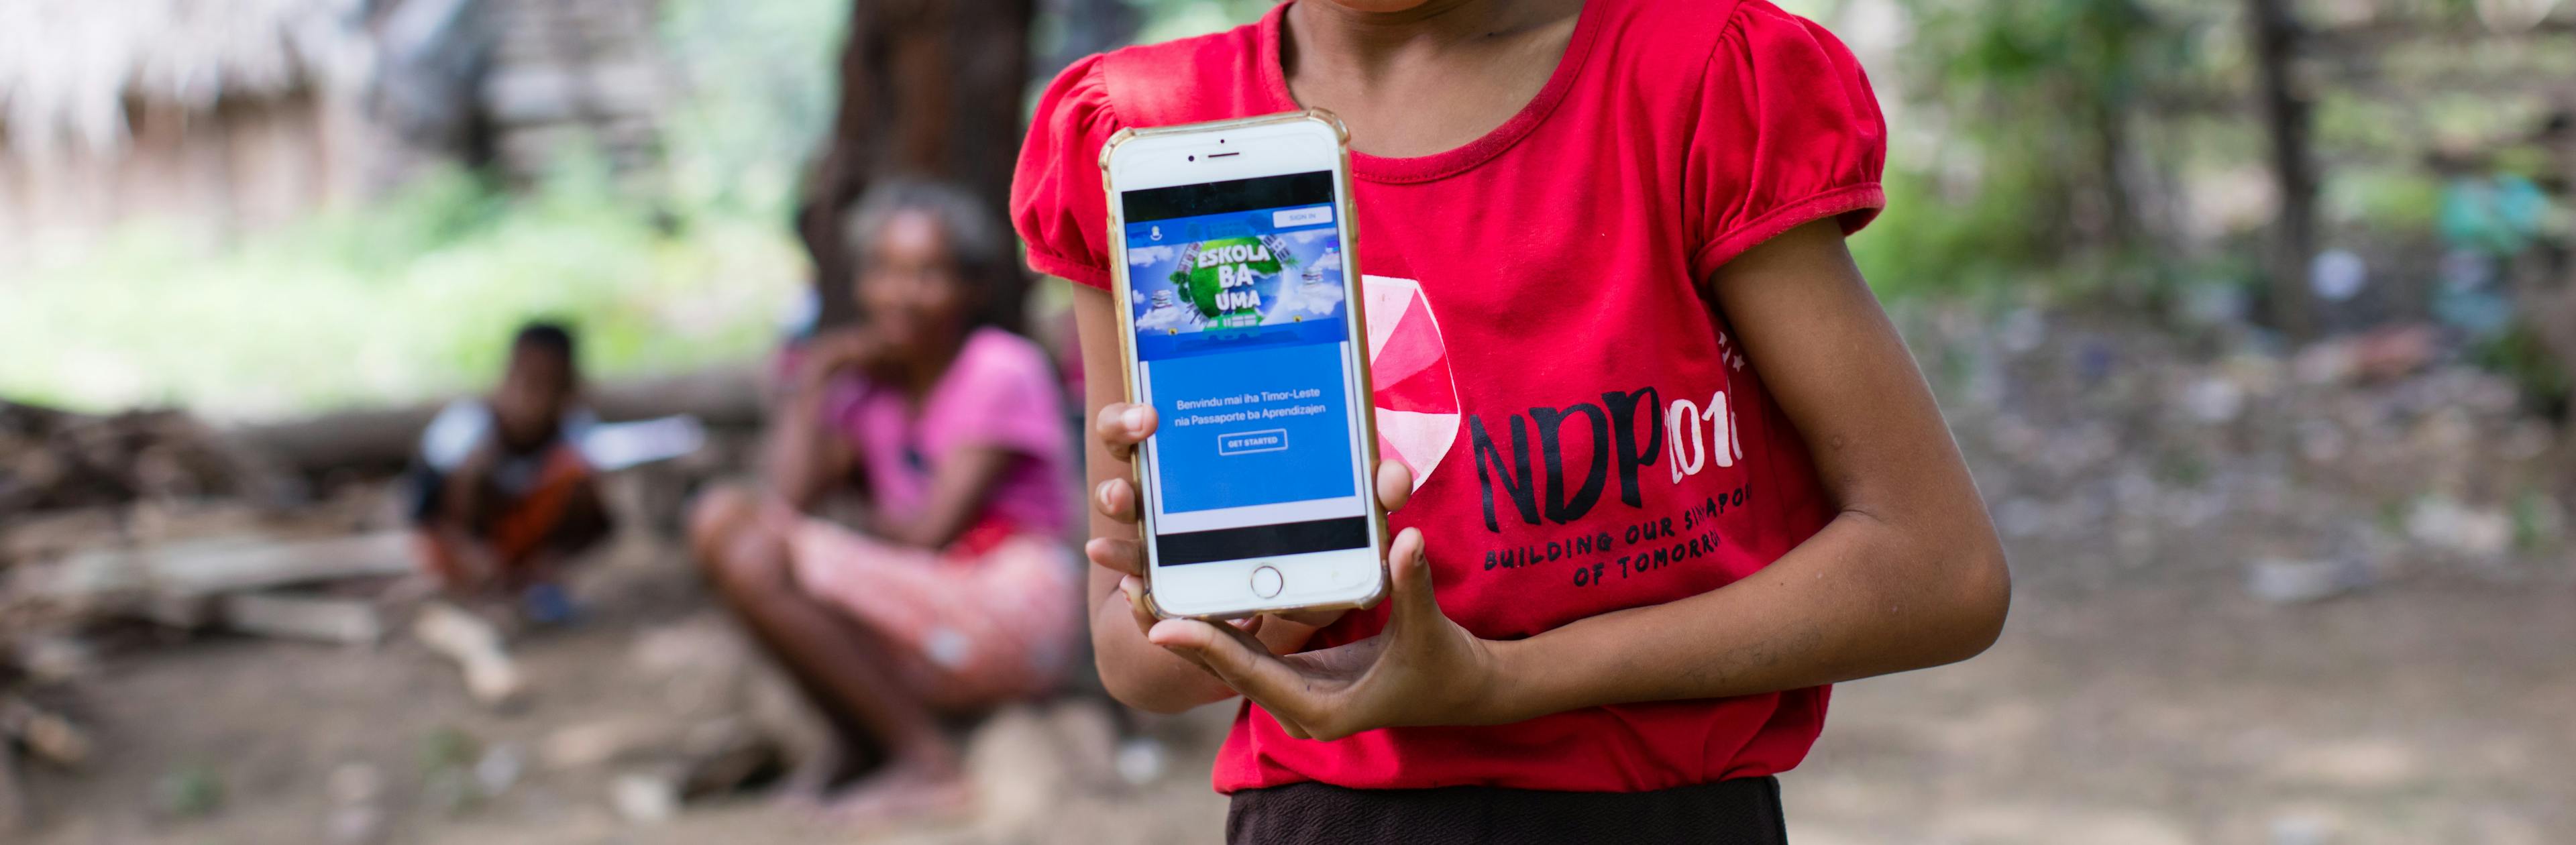 On 14 April 2020, a girl shows off the online platform on which children and parents in Timor-Leste can access a range of audio-visual material to help students continue learning during ongoing school closures.